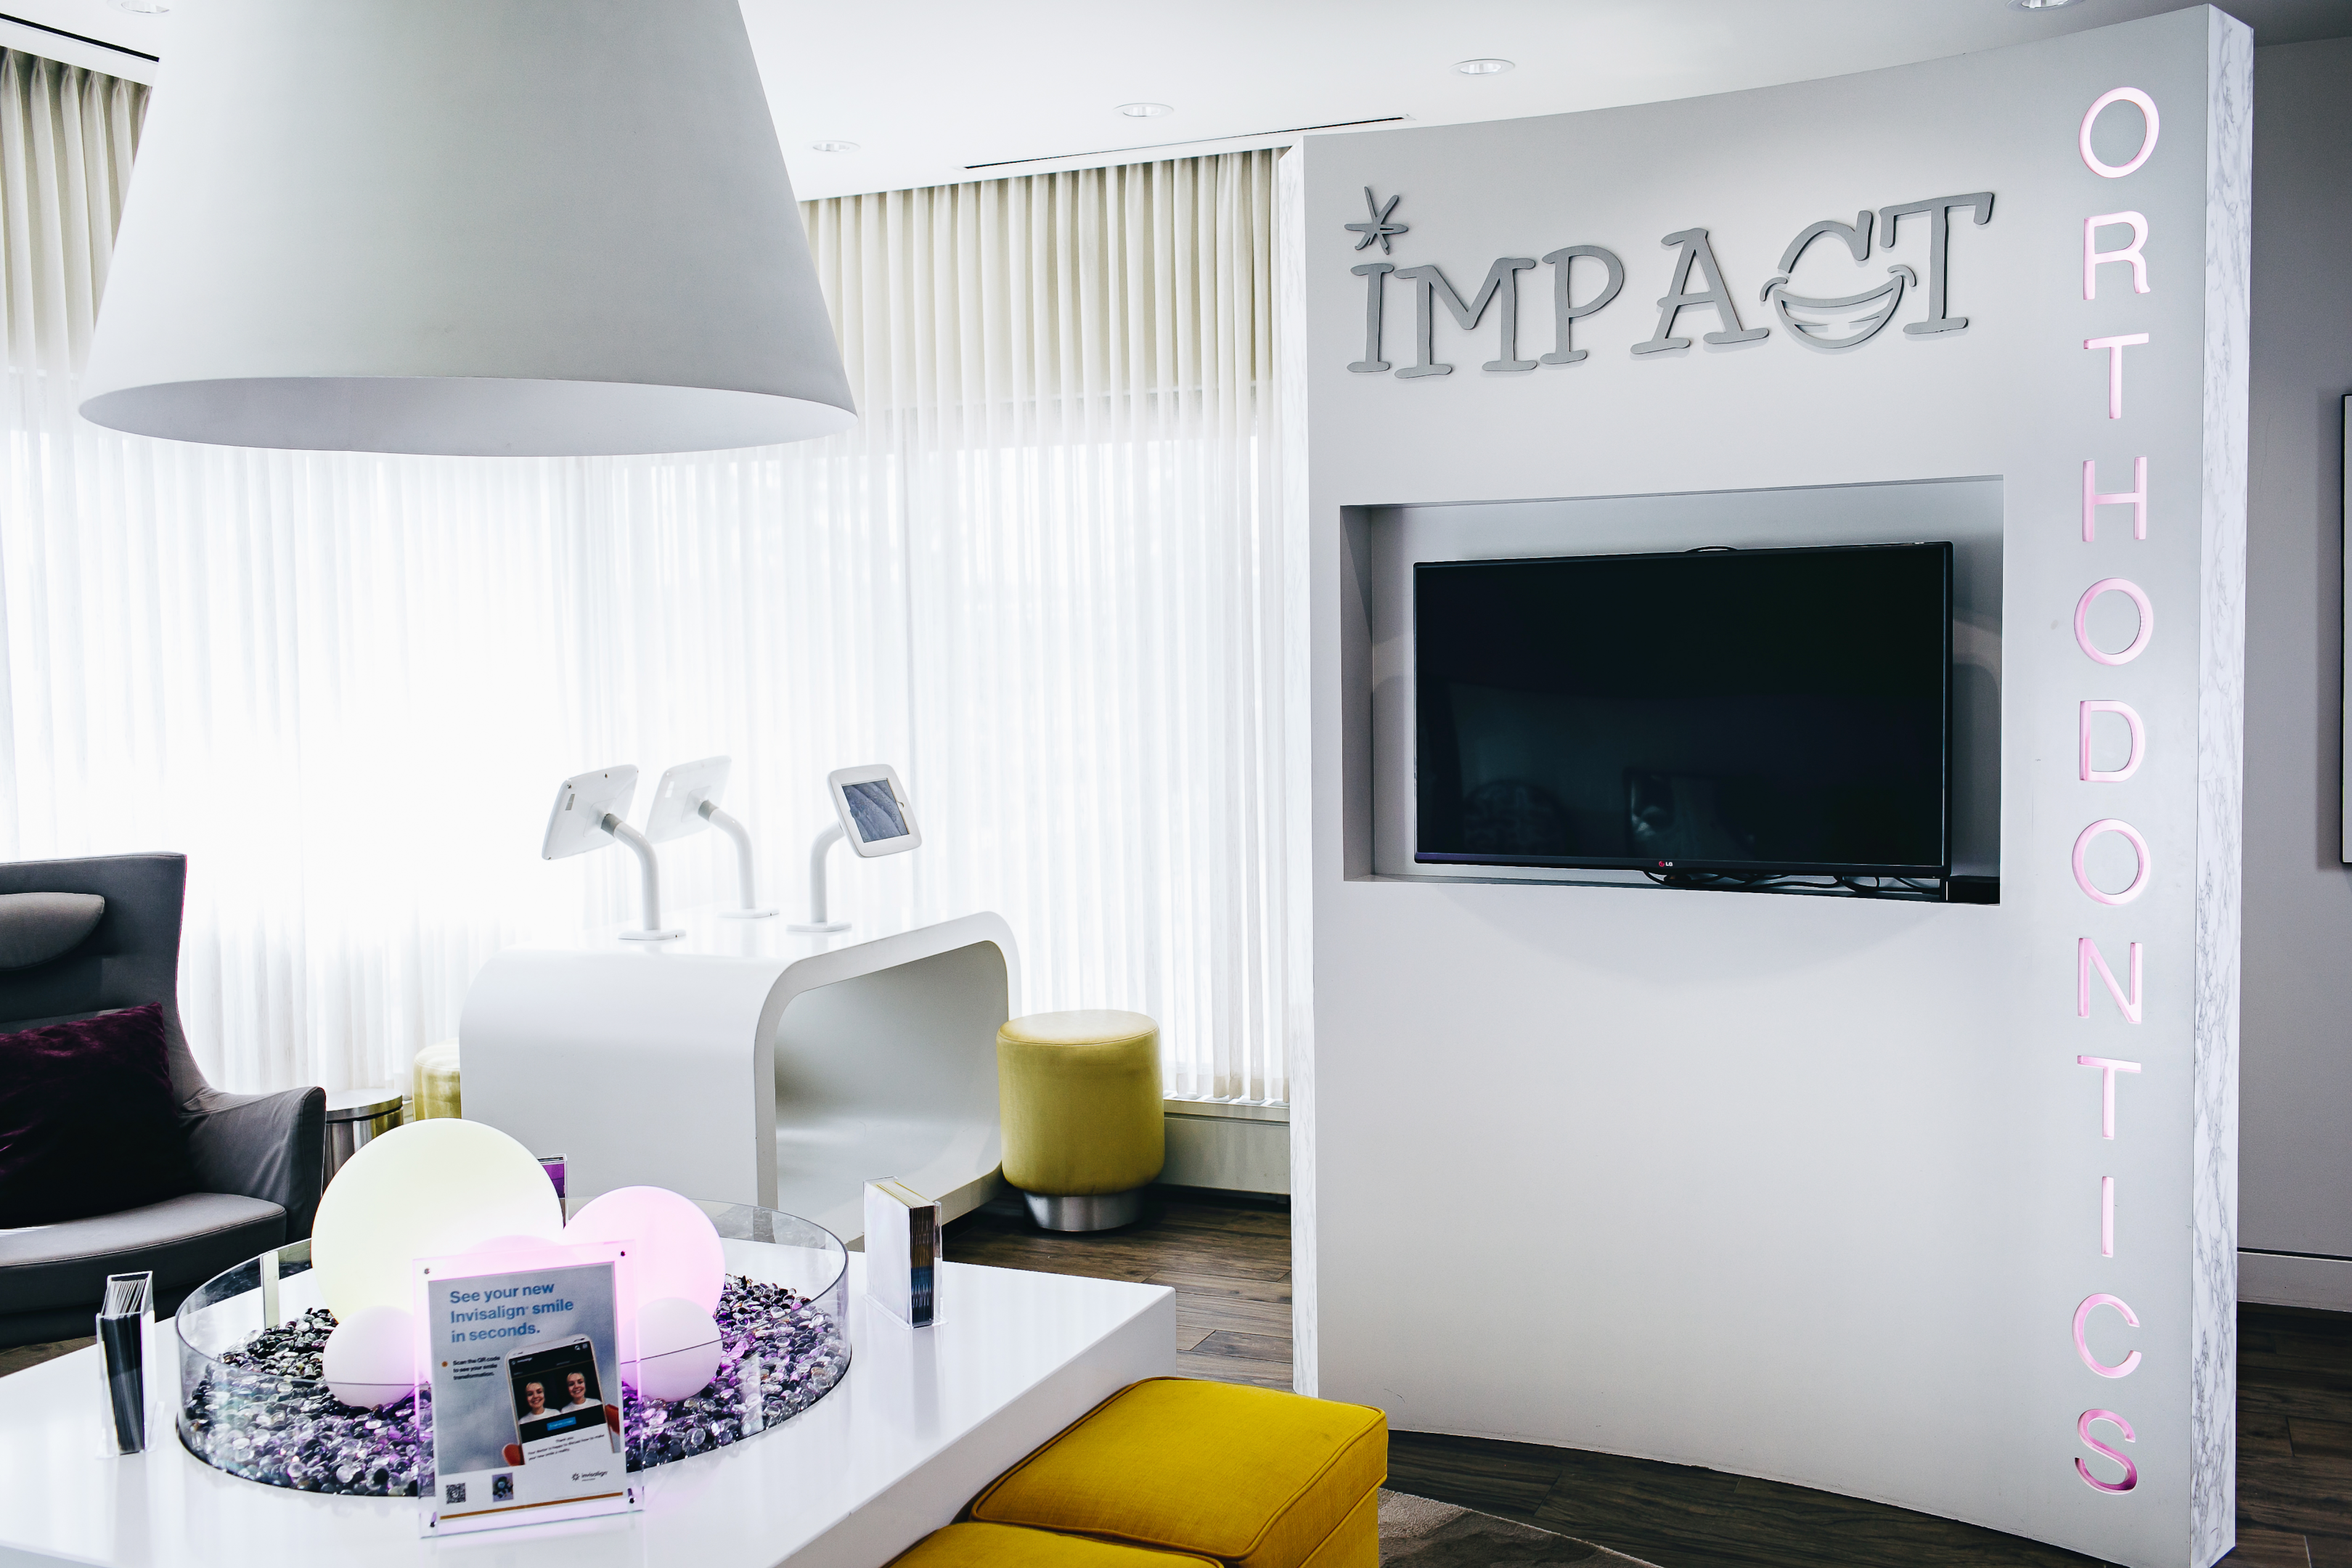 Impact Orthodontics is conveniently located in calgary and provides excellent dental care